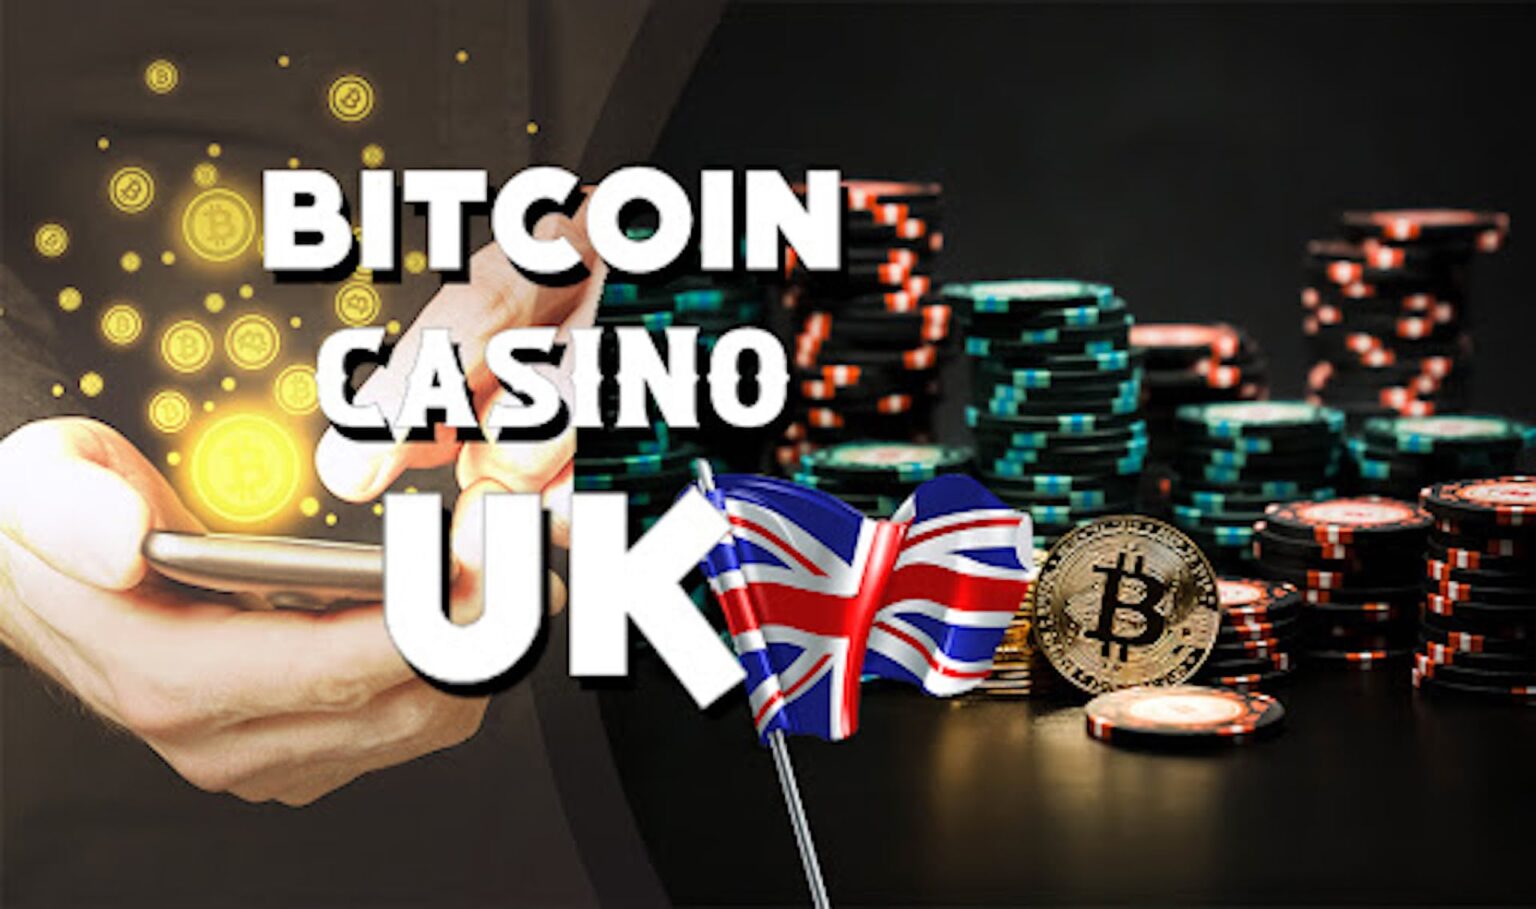 Join us for our thoughts on the very best crypto casinos in the UK right now for gambling with cryptocurrencies such as Bitcoin, Dogecoin and Ethereum.